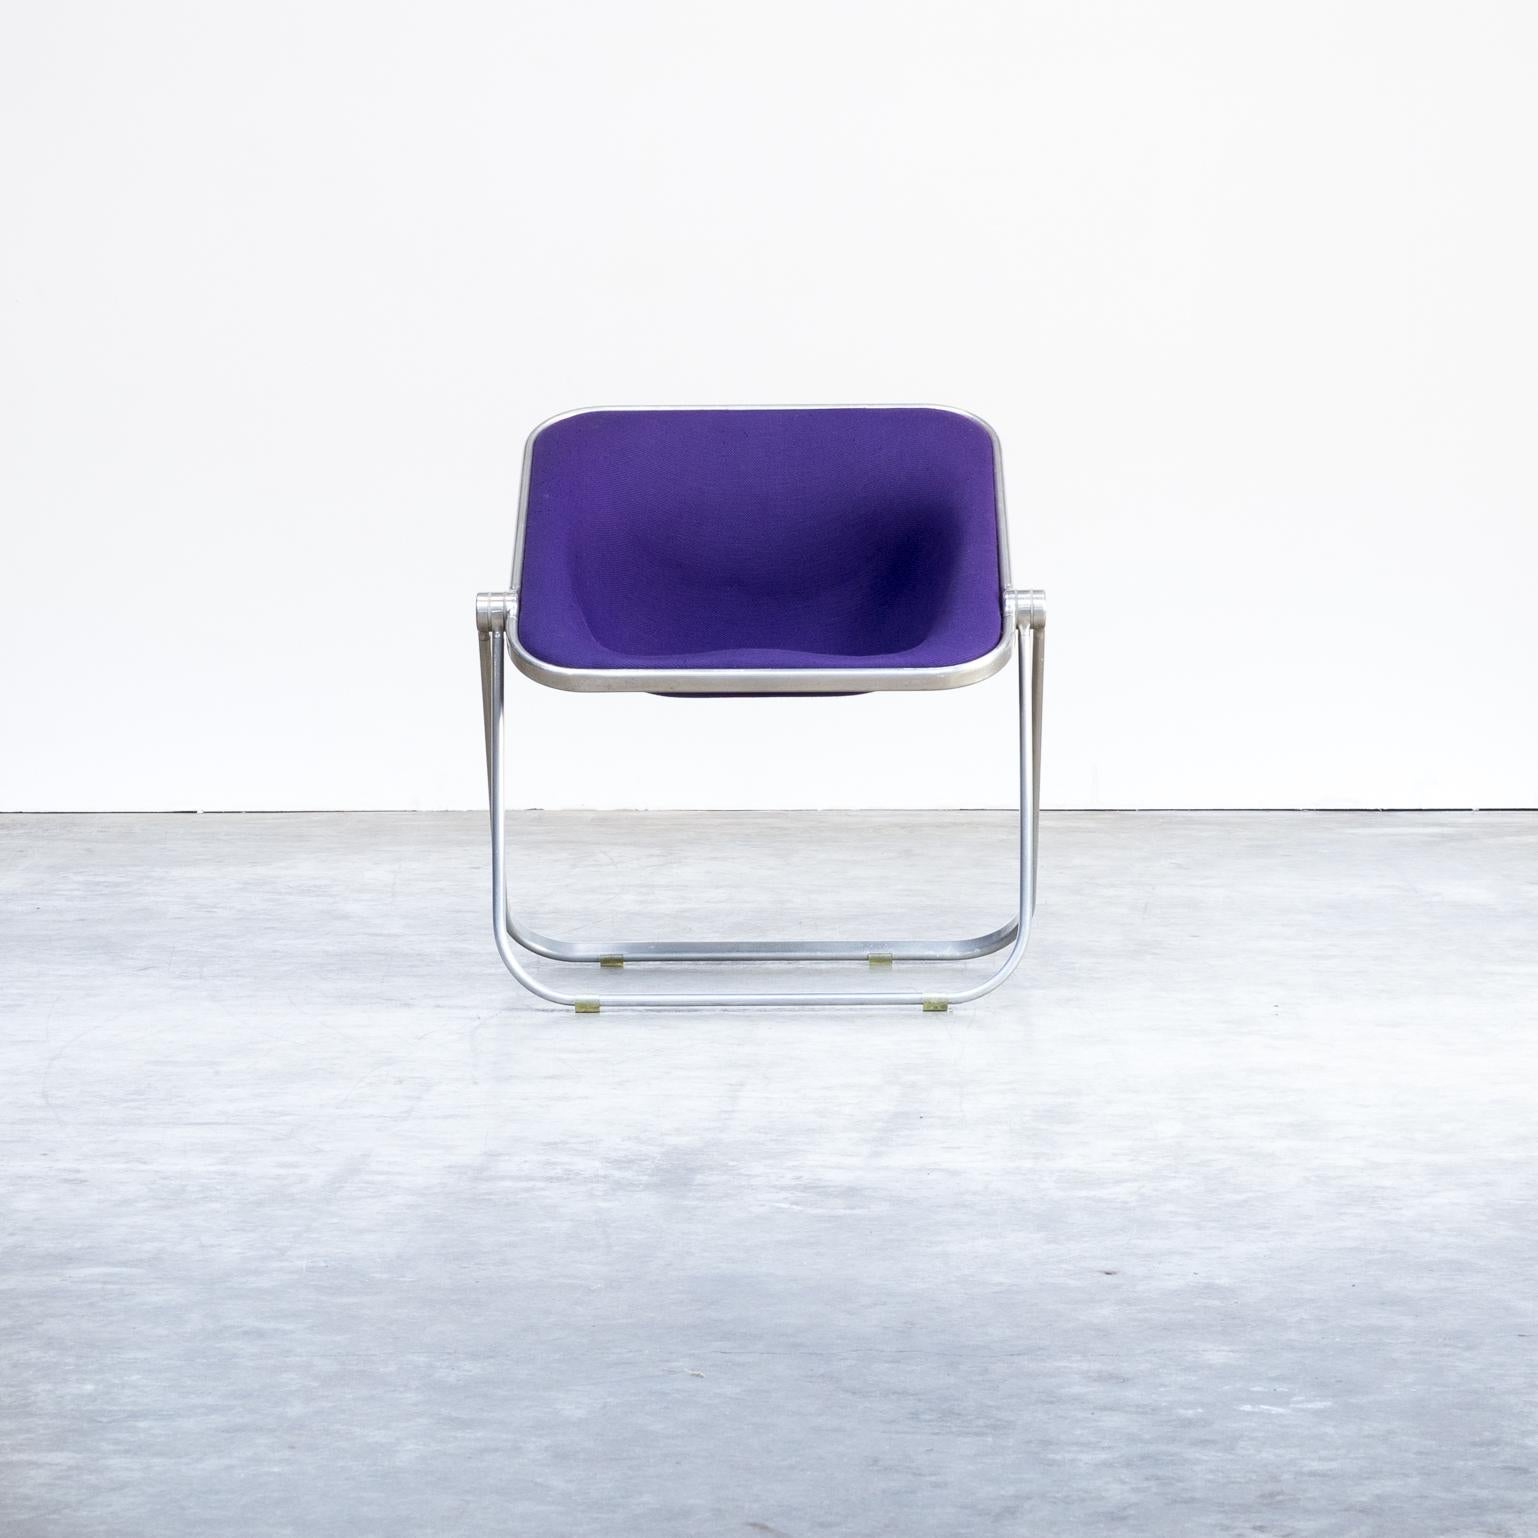 1970s Giancarlo Piretti ‘Plona’ folding chair for Castelli. He designed this foldable and comfortable Plona lounge chair for Castelli in 1969. This lounge chair evolved from the award winning Plona chair in 1967. The chair is, foldable, yet it holds